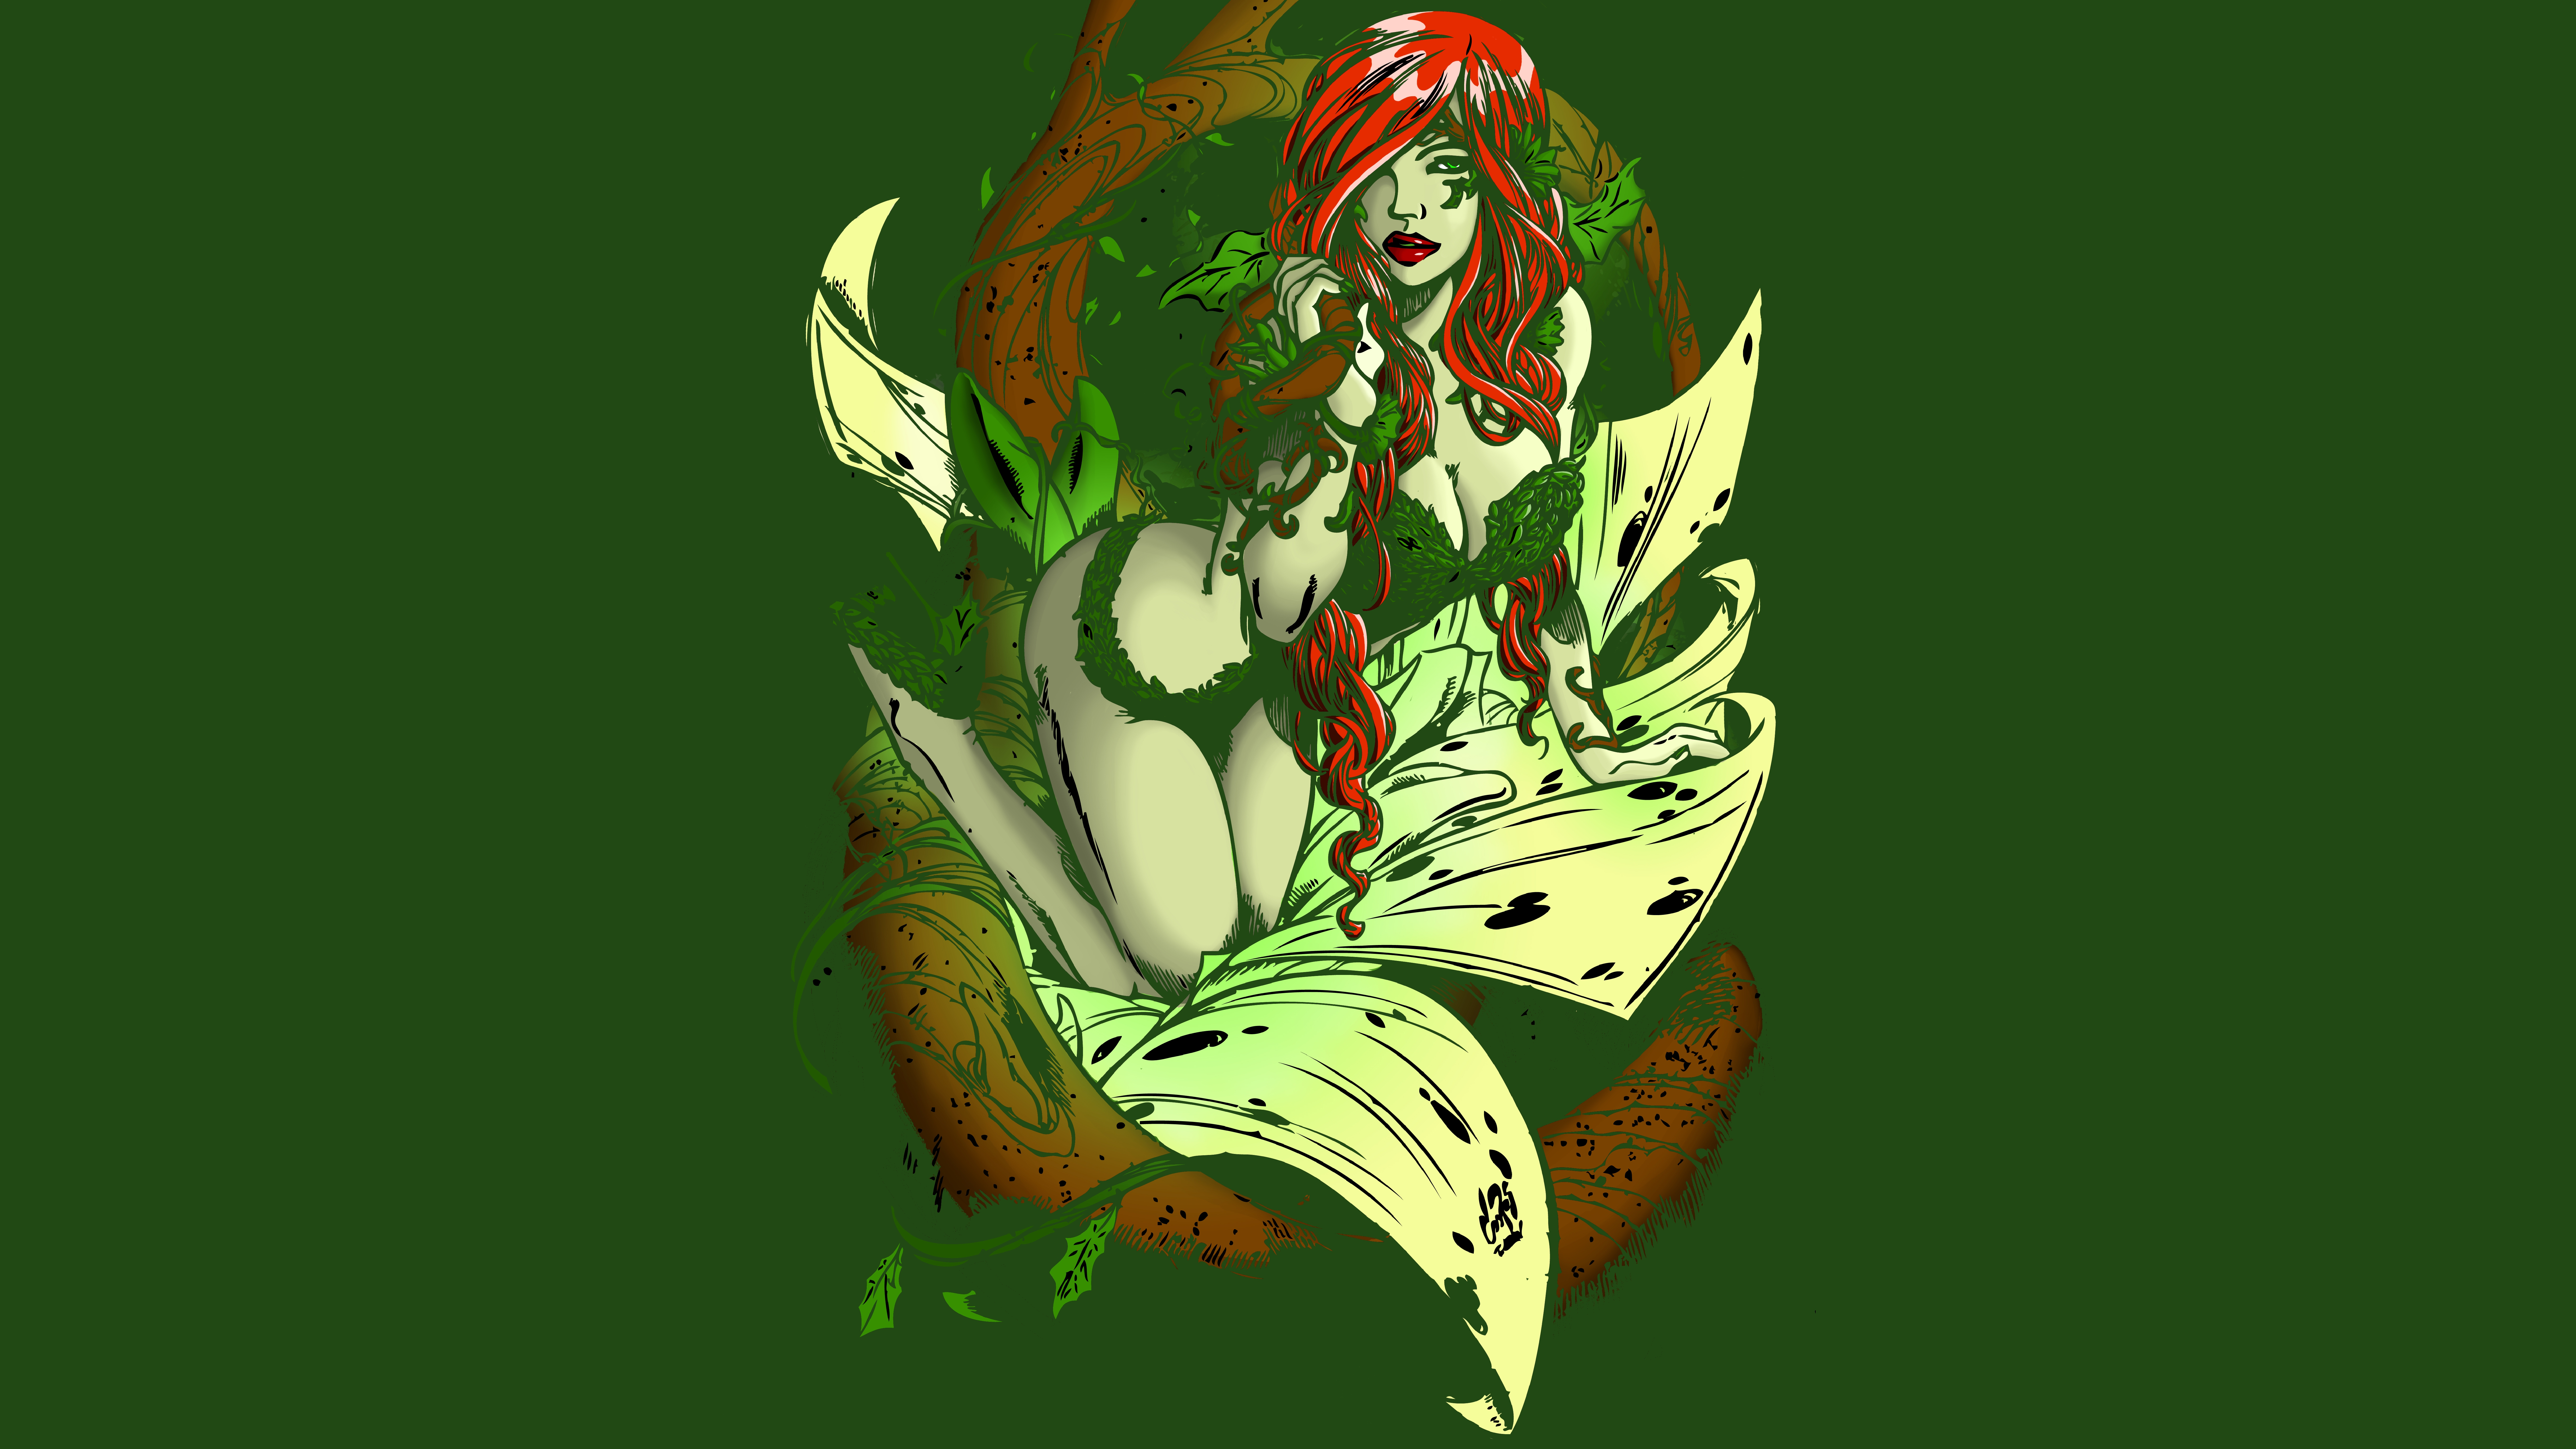 Poison Ivy Wallpapers Pictures Images HD Wallpapers Download Free Map Images Wallpaper [wallpaper684.blogspot.com]